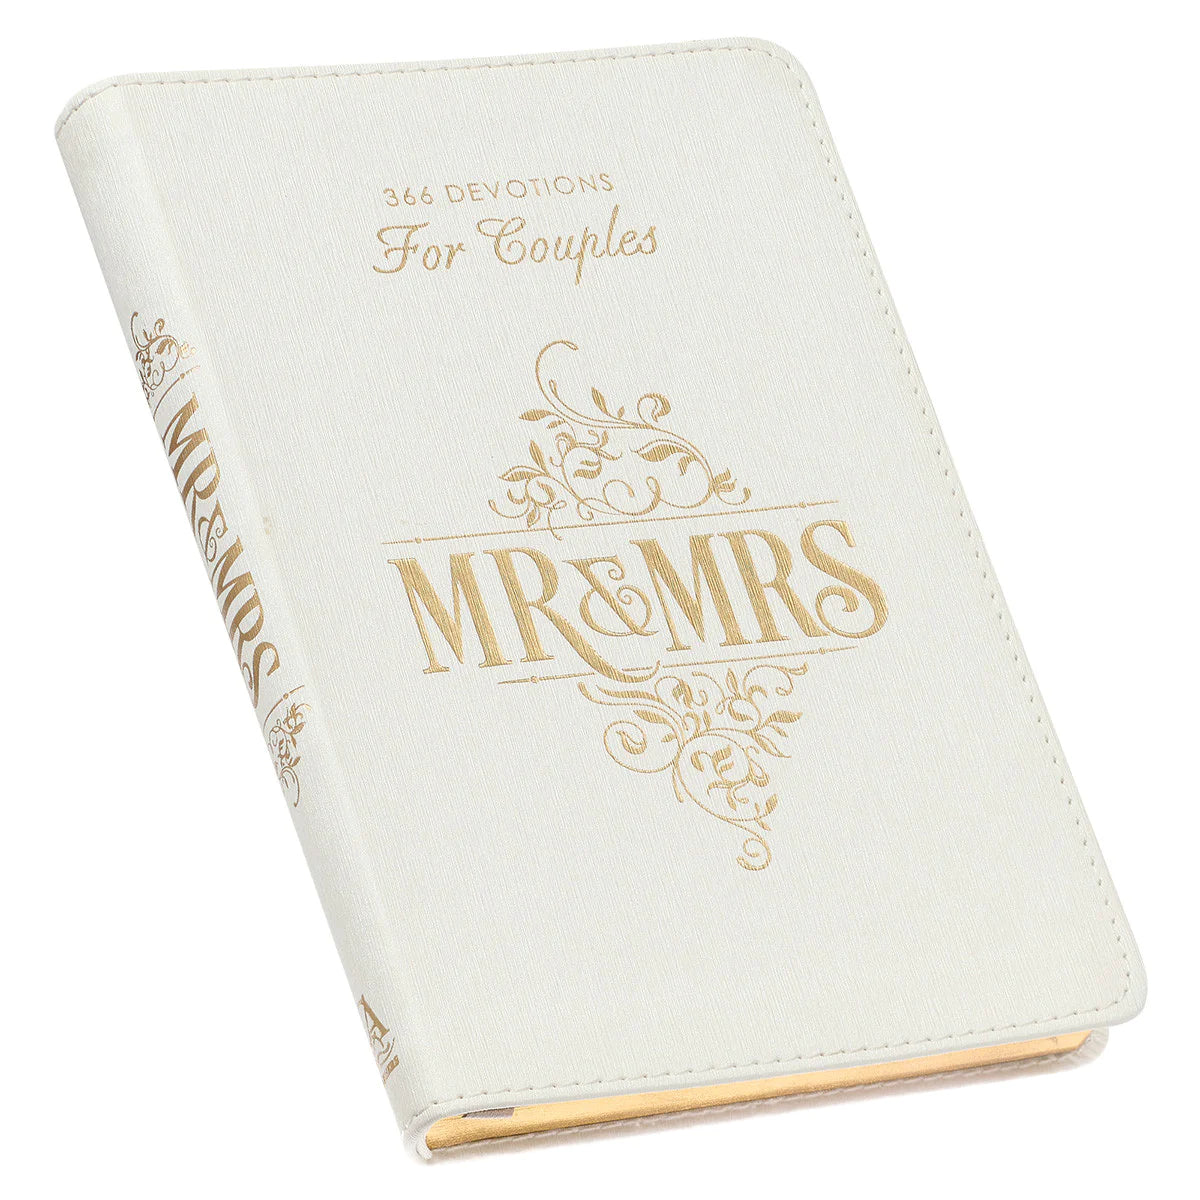 Mr & Mrs 366 Devotions For Couples - Faux Leather Yearly Devotional